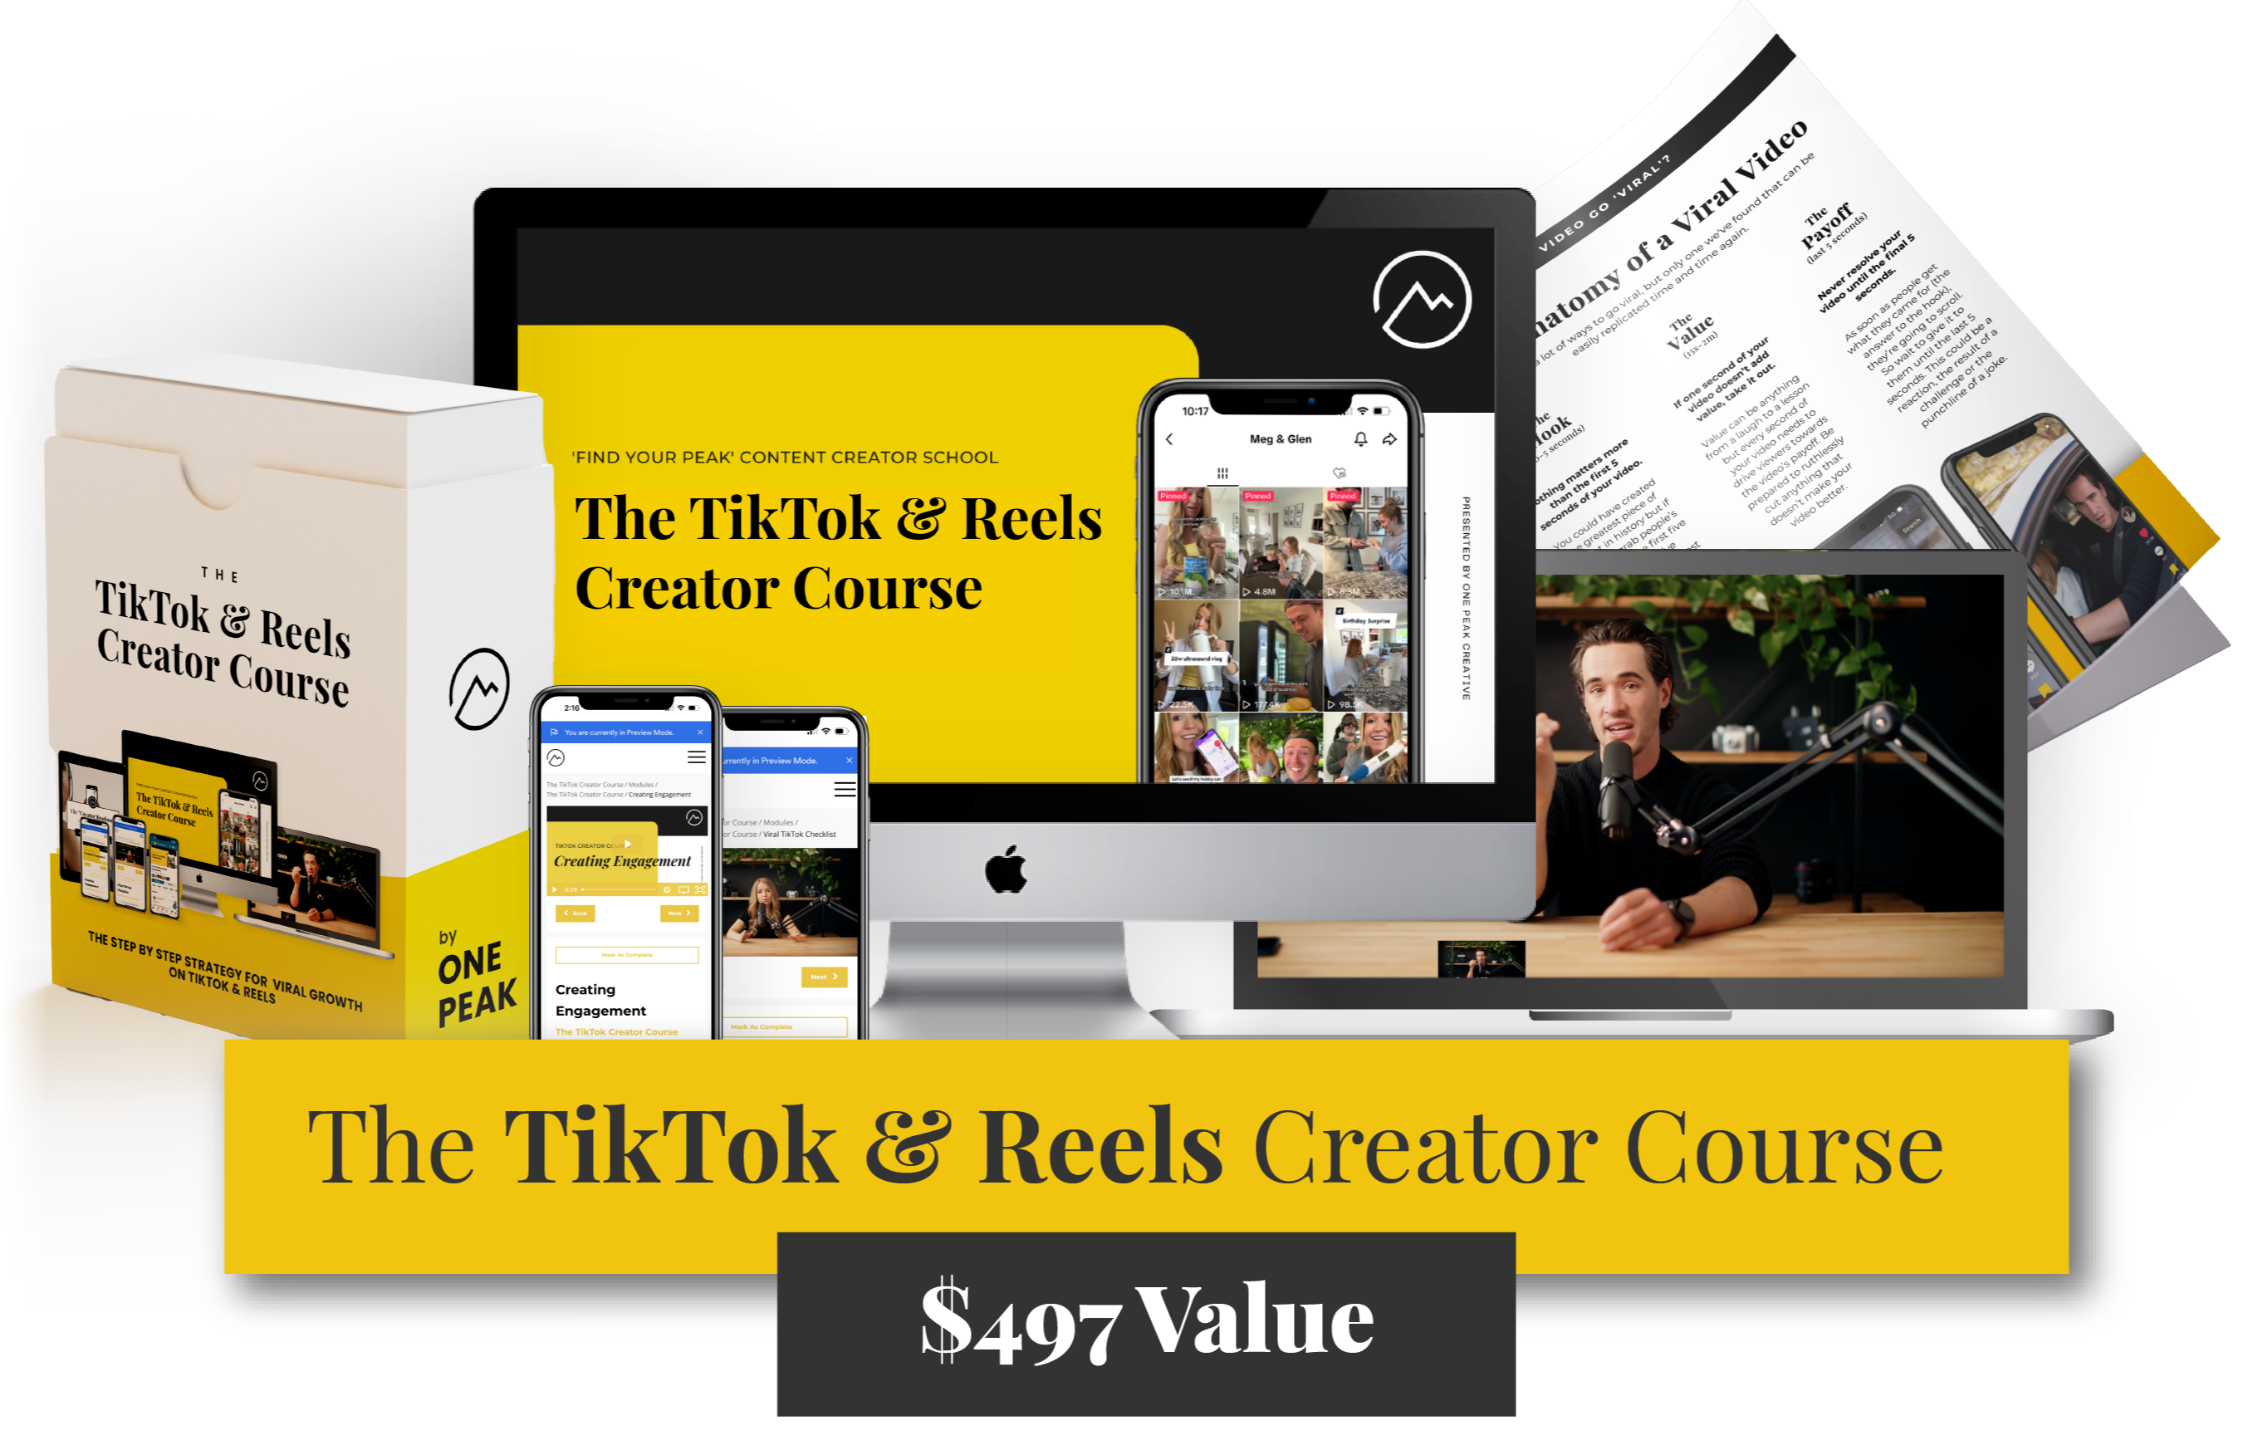 One Peak Creative Agency – The Tiktok and Reels Creator Course Download